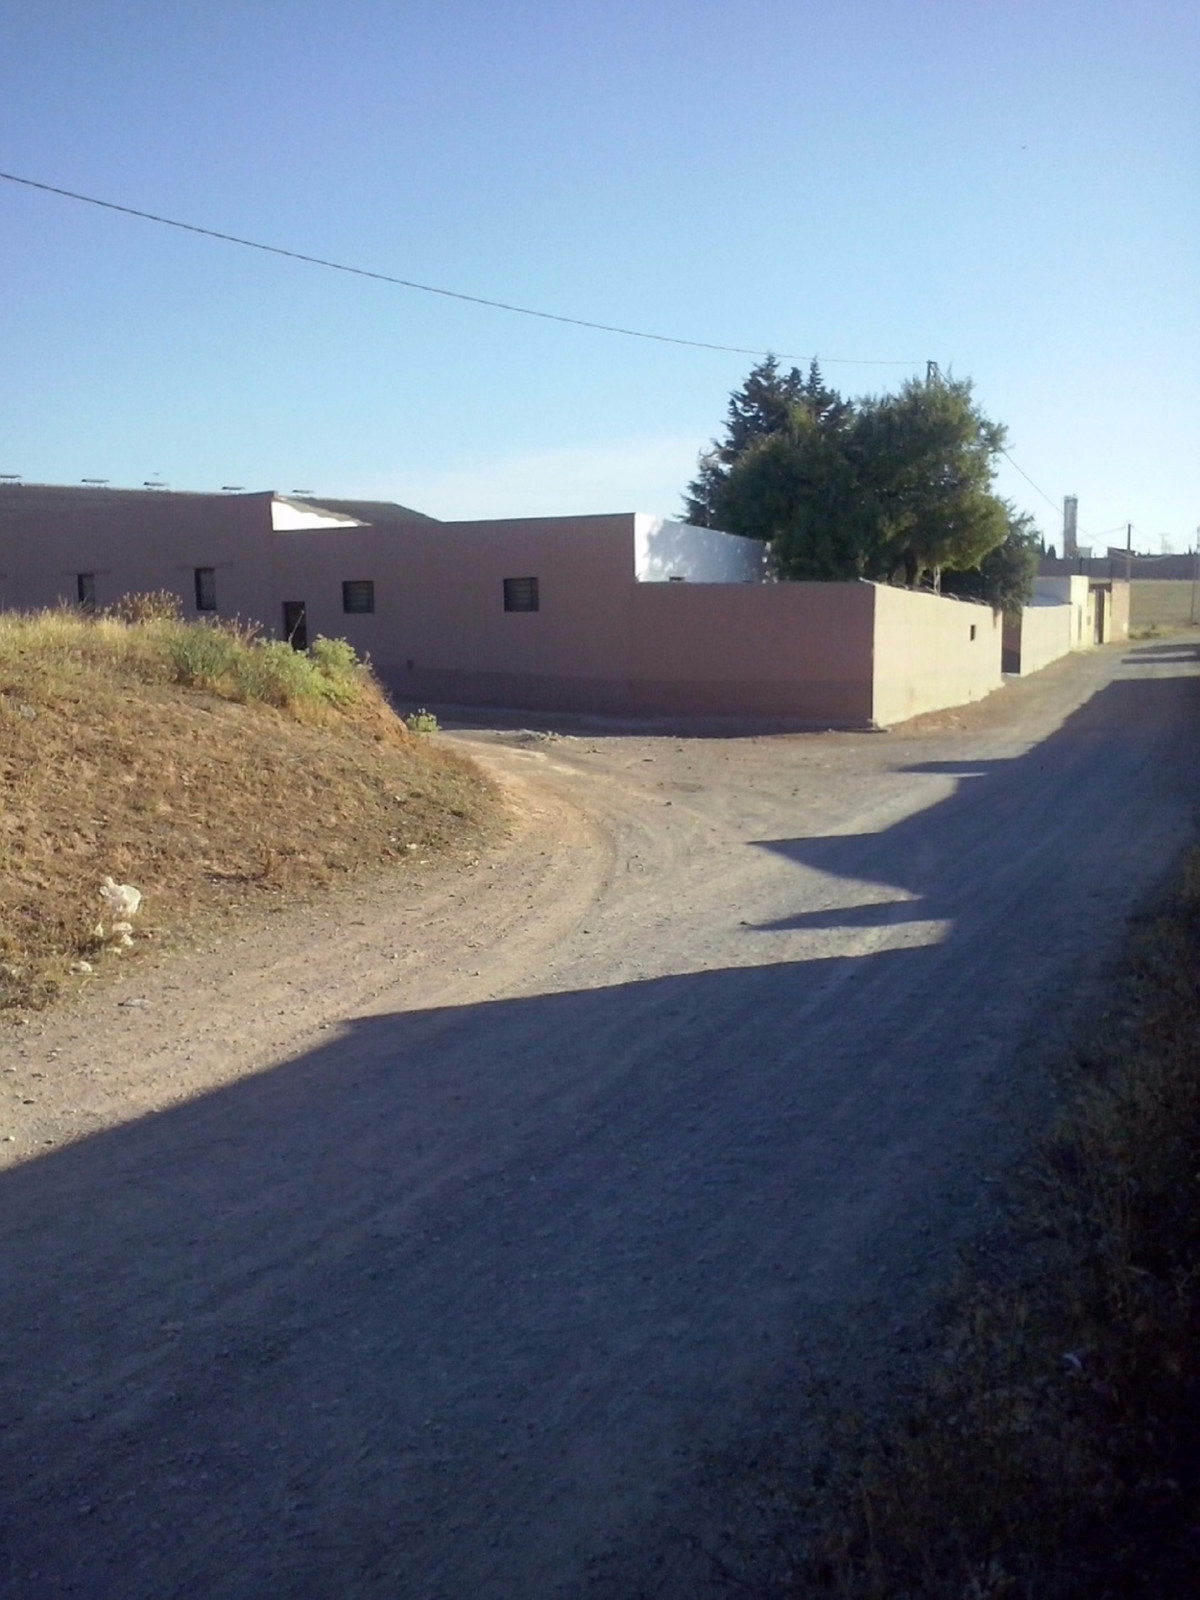 RUSTIC FINCA with small house located at 200 MTS FROM CAMPILLOS.